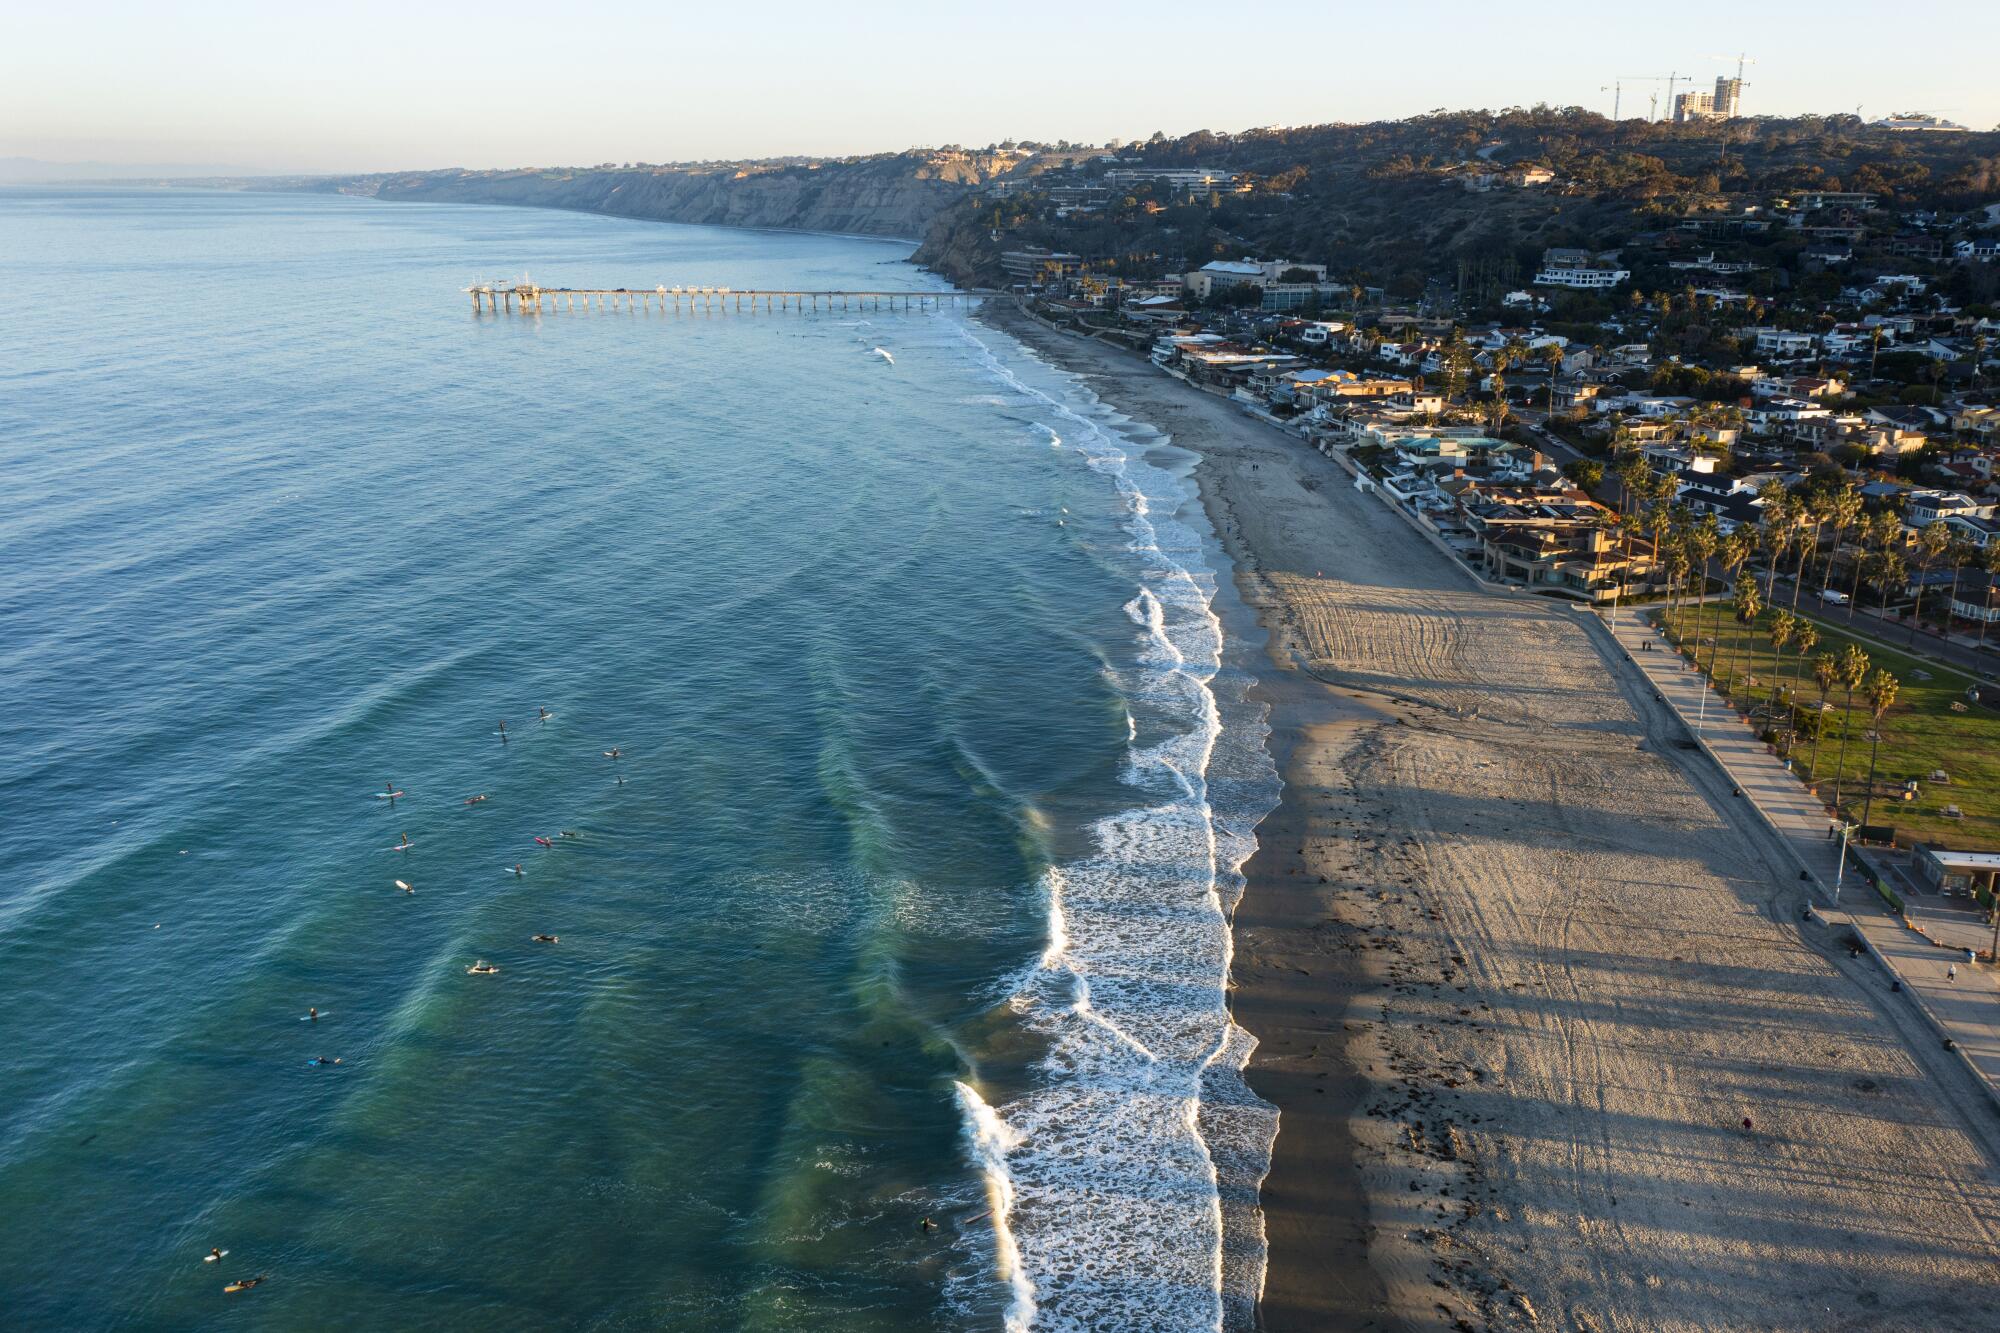 An aerial view of La Jolla Shores Beach and the waves breaking, with the Scripps Research Pier in the background.